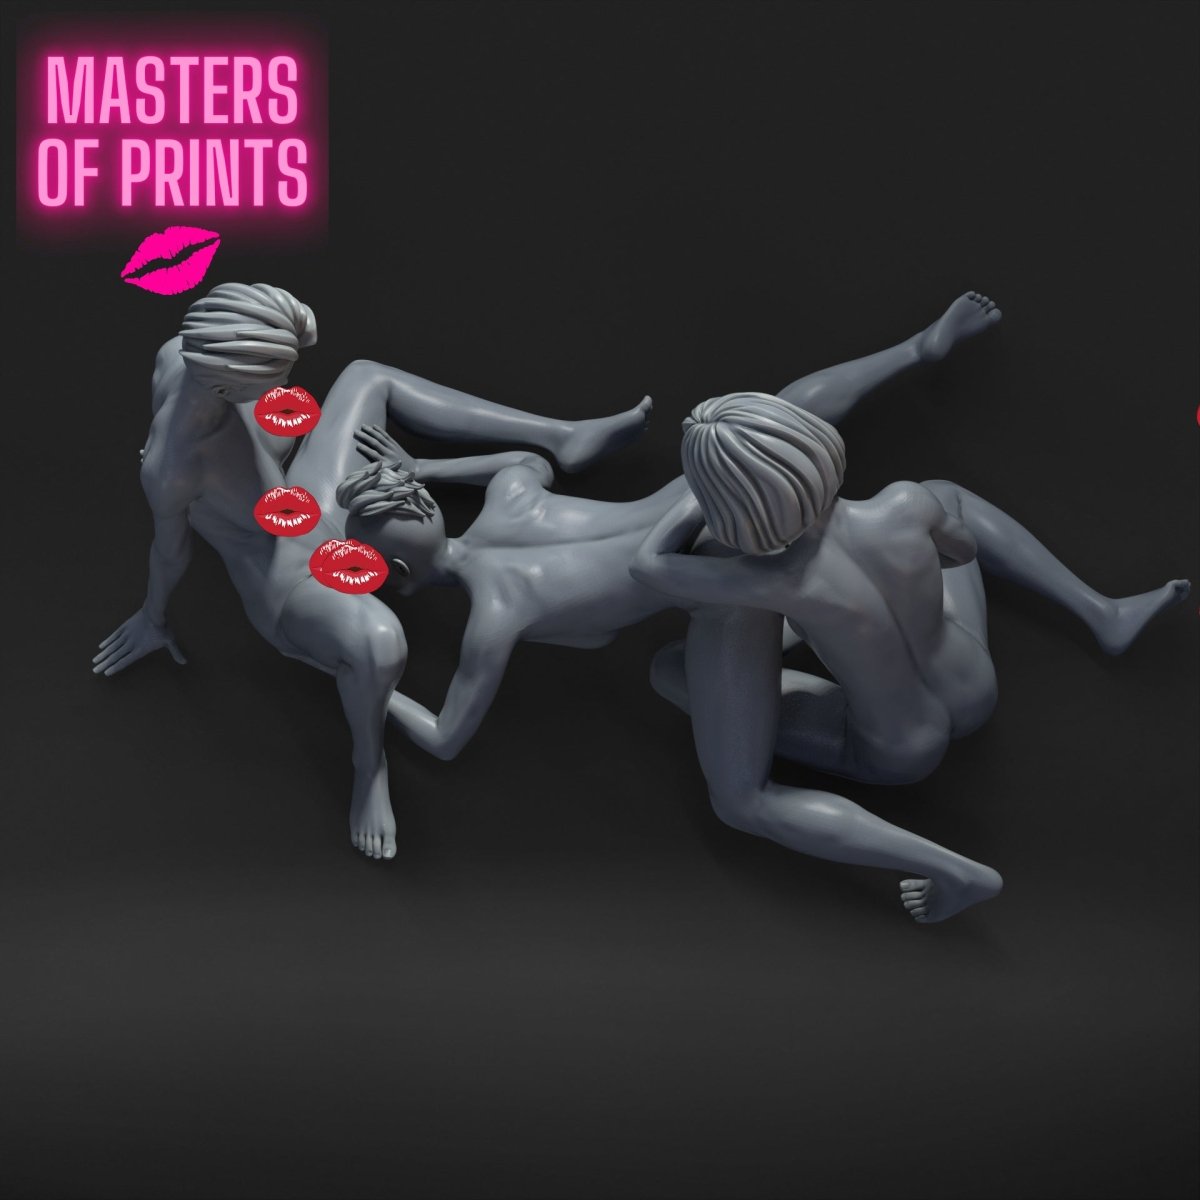 3some 535 Mature 3d Printed miniature FanArt by Masters Of Prints Collectables Statues & Figurines